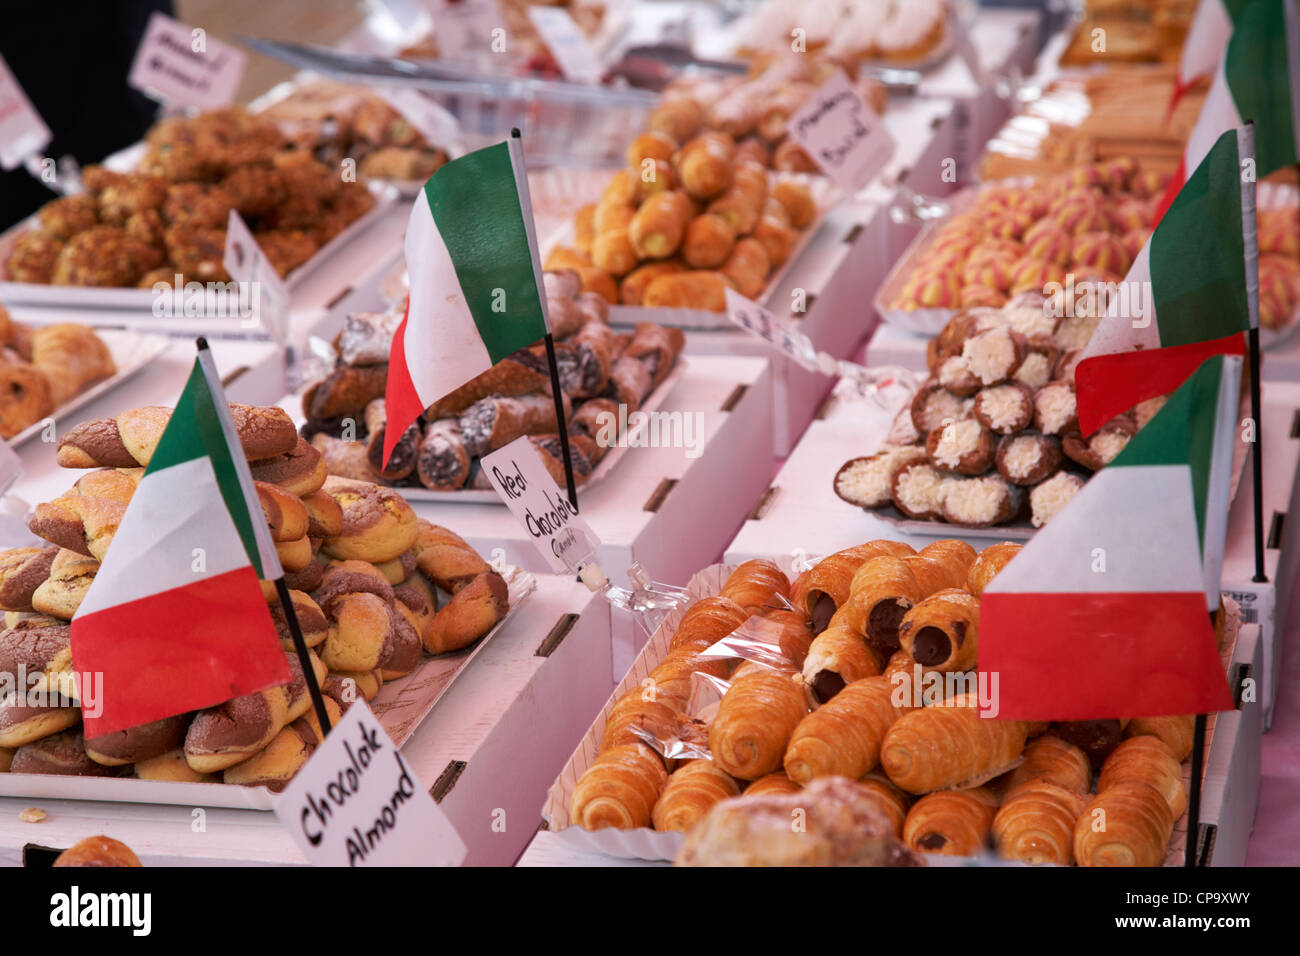 various italian cannoli desserts and biscuits on sale at an italian food market in the uk Stock Photo